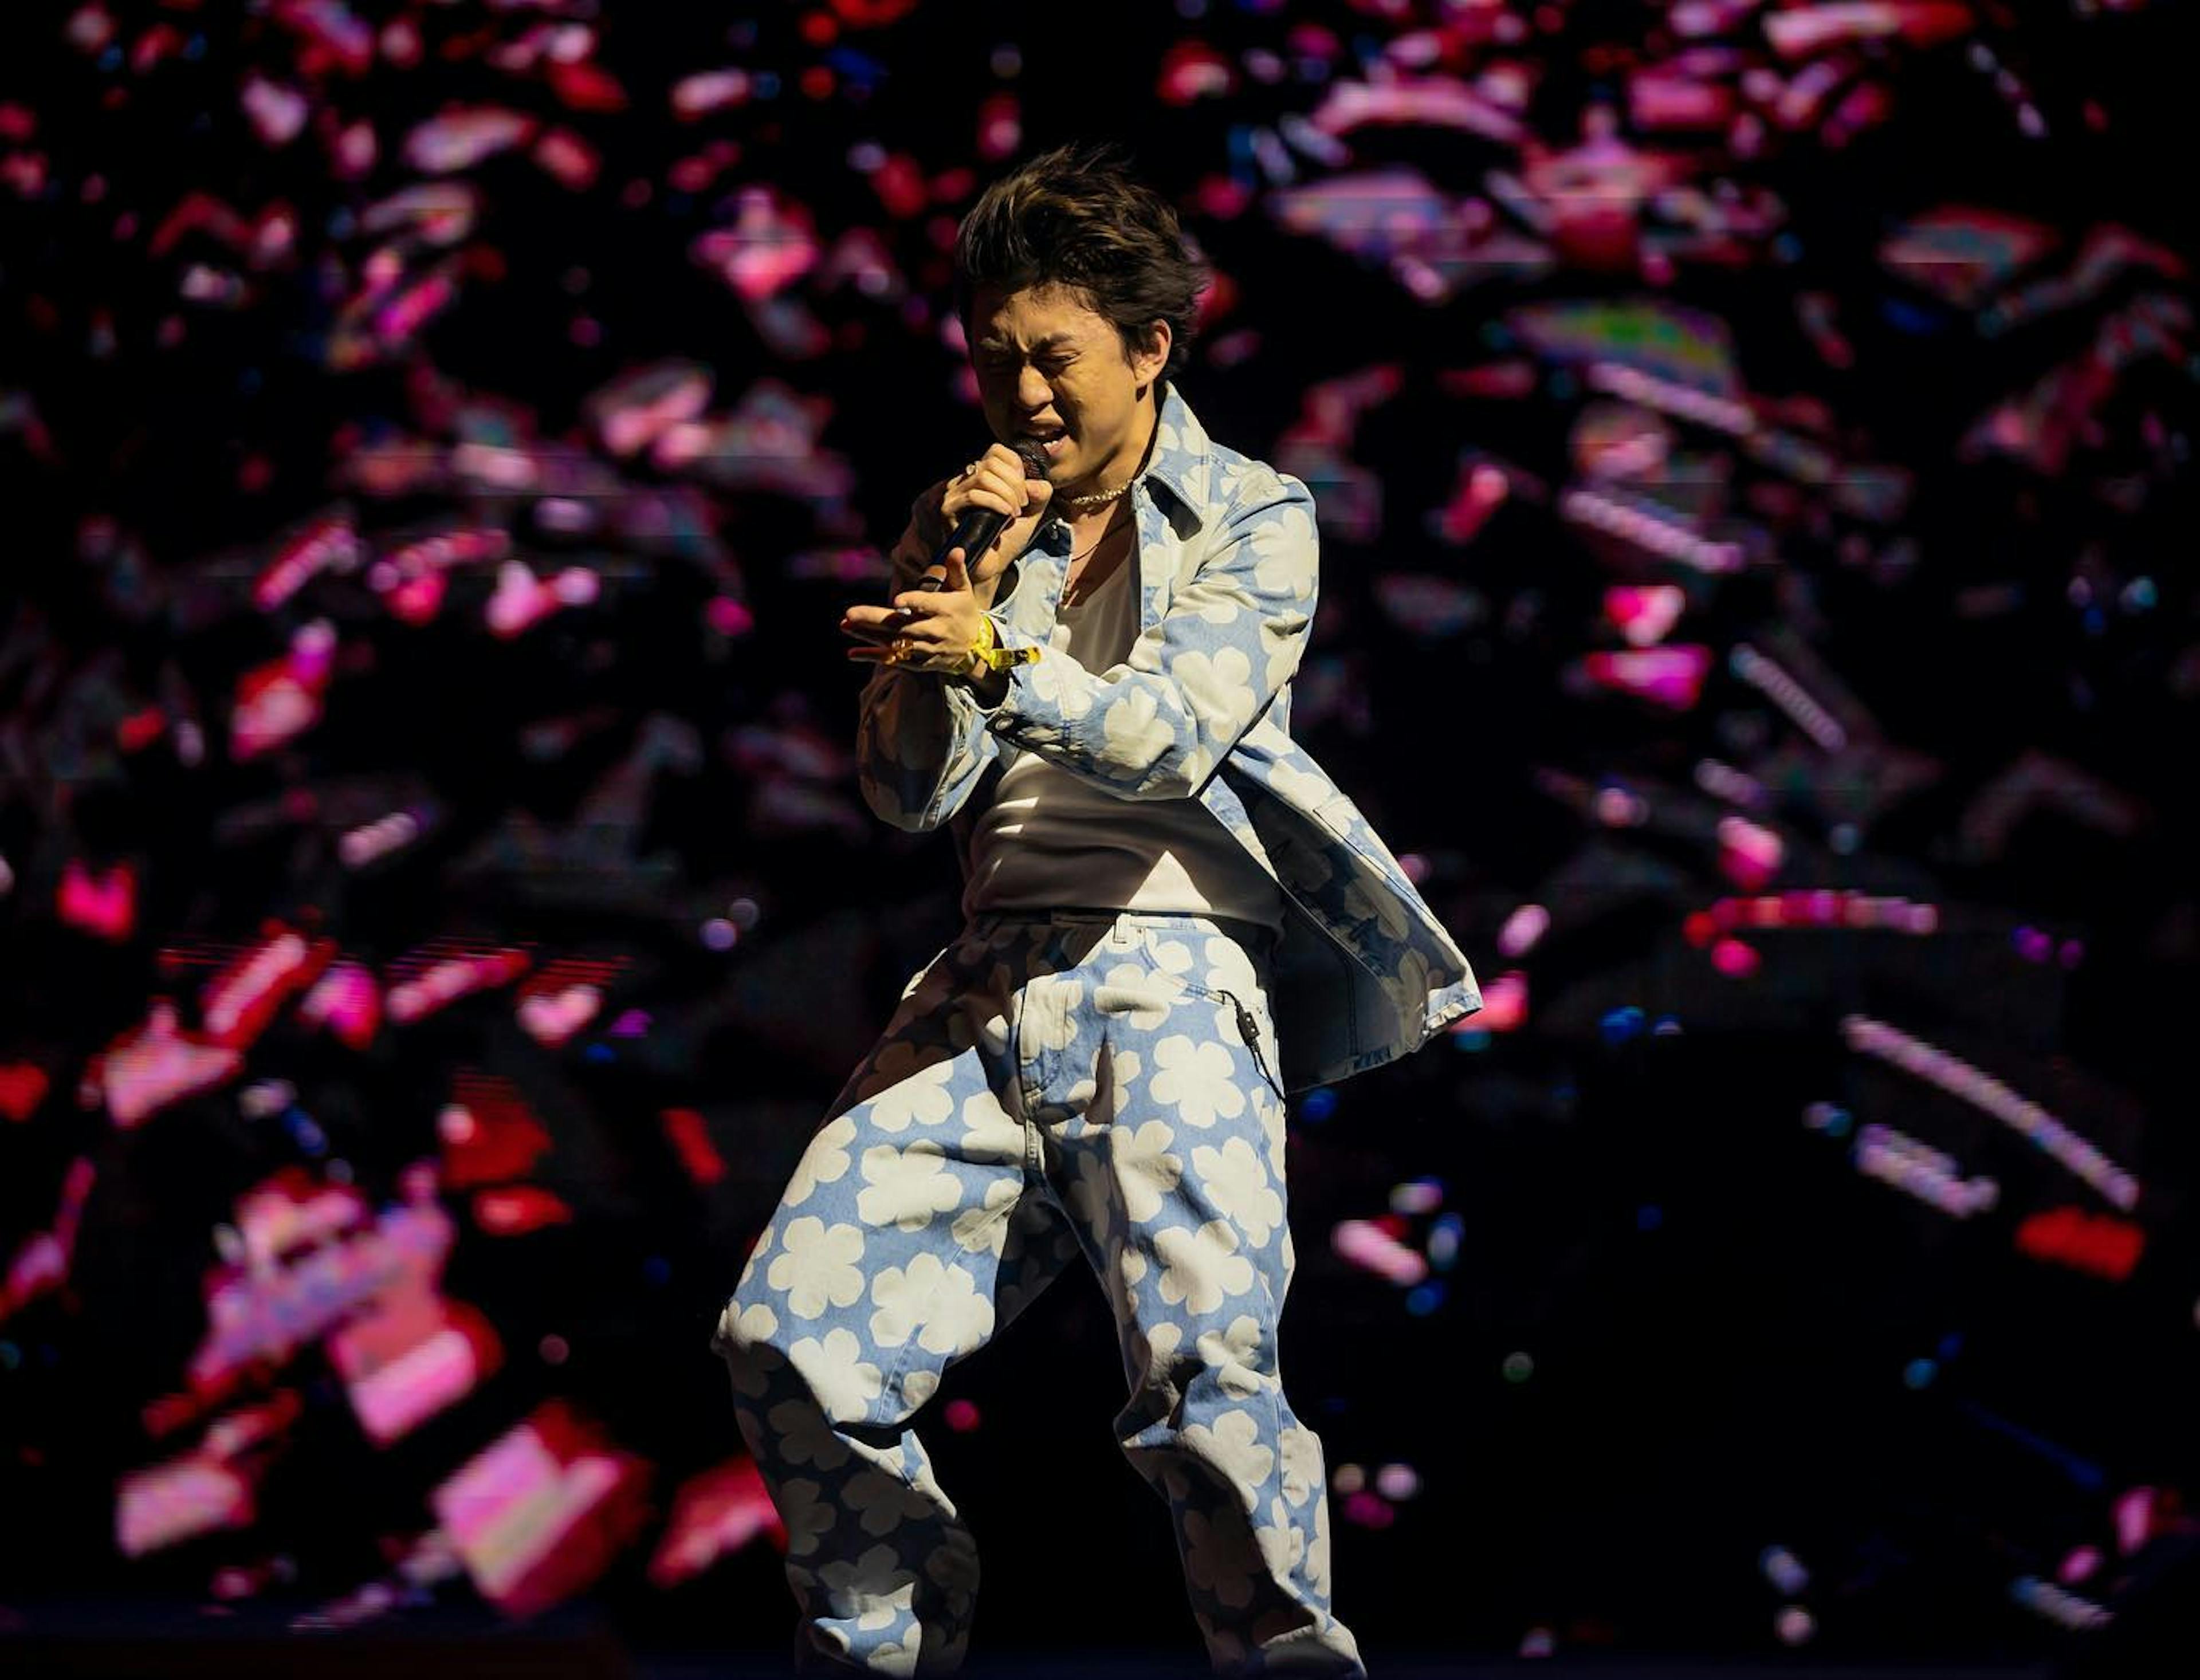 Rich Brian is performing energetically on stage at Coachella. He's donning a light blue and white floral suit, infusing his dynamic stage presence with style. With his hair swept back and eyes closed, he sings into the microphone with intense emotion. The backdrop is a riot of abstract pink and blue lights, casting a vibrant glow that captures the festival's electric atmosphere and the artist's passionate performance.